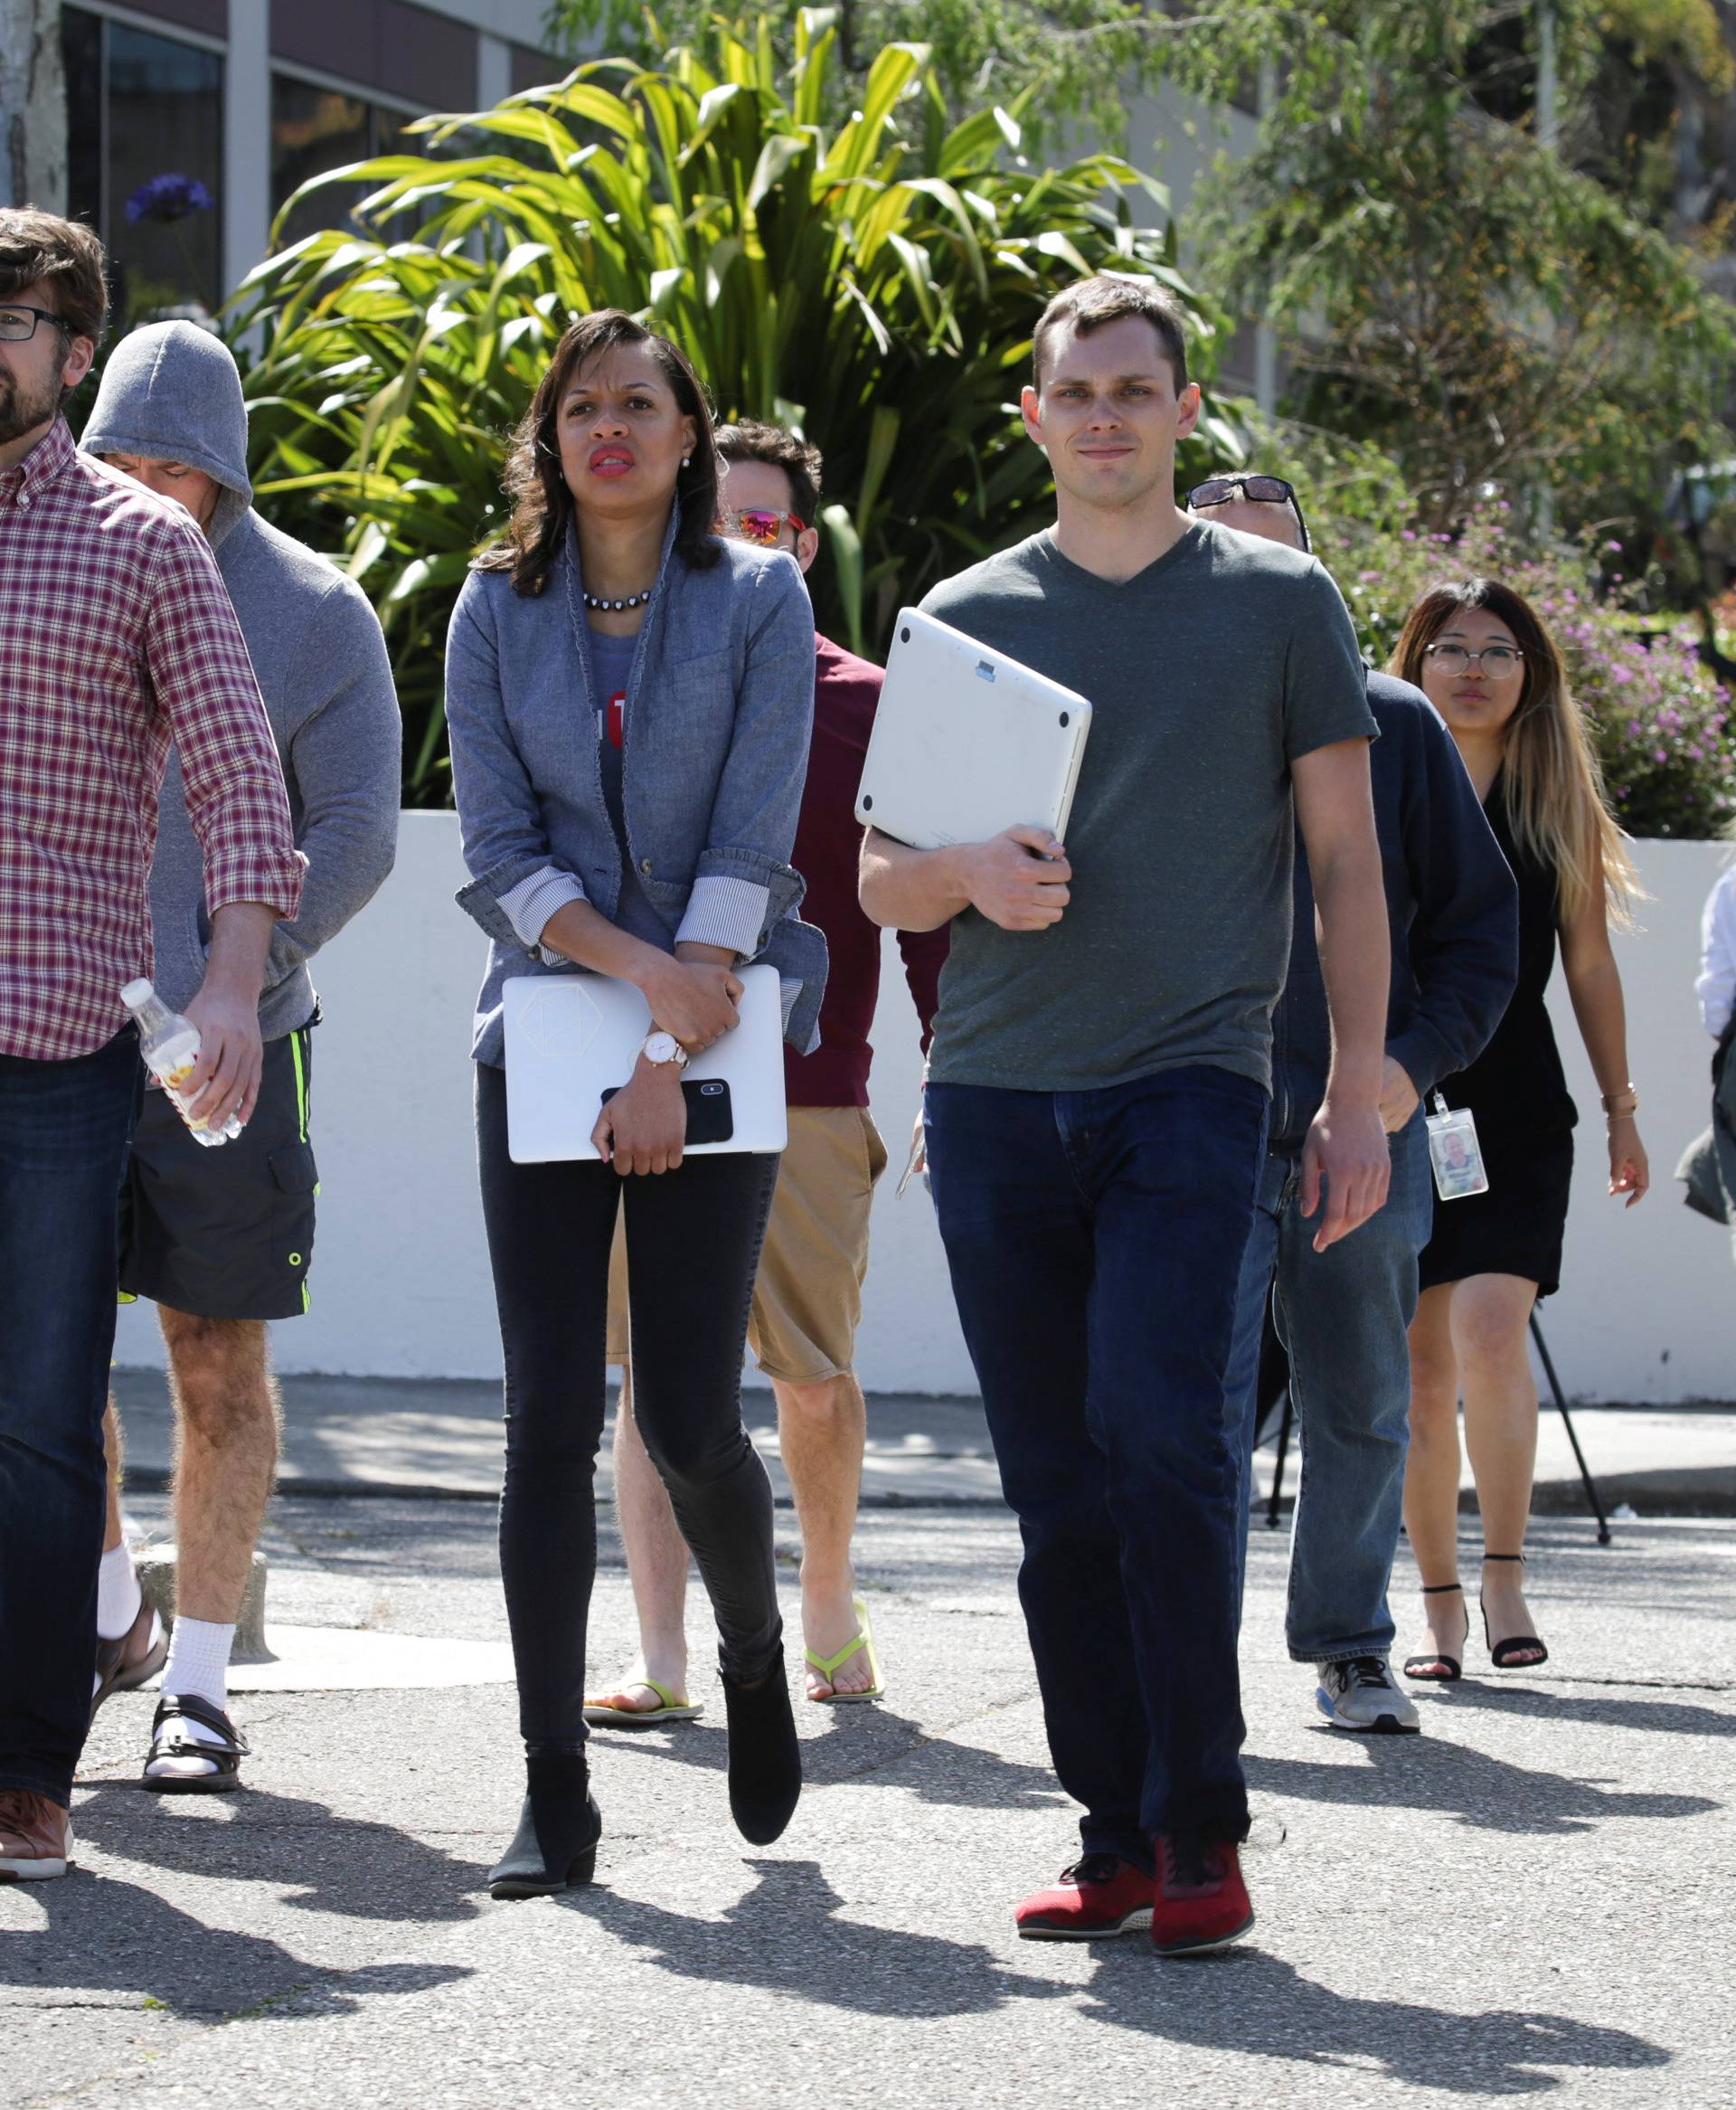 YouTube employees are seen walking away from Youtube headquarters following an active shooter situation in San Bruno, California